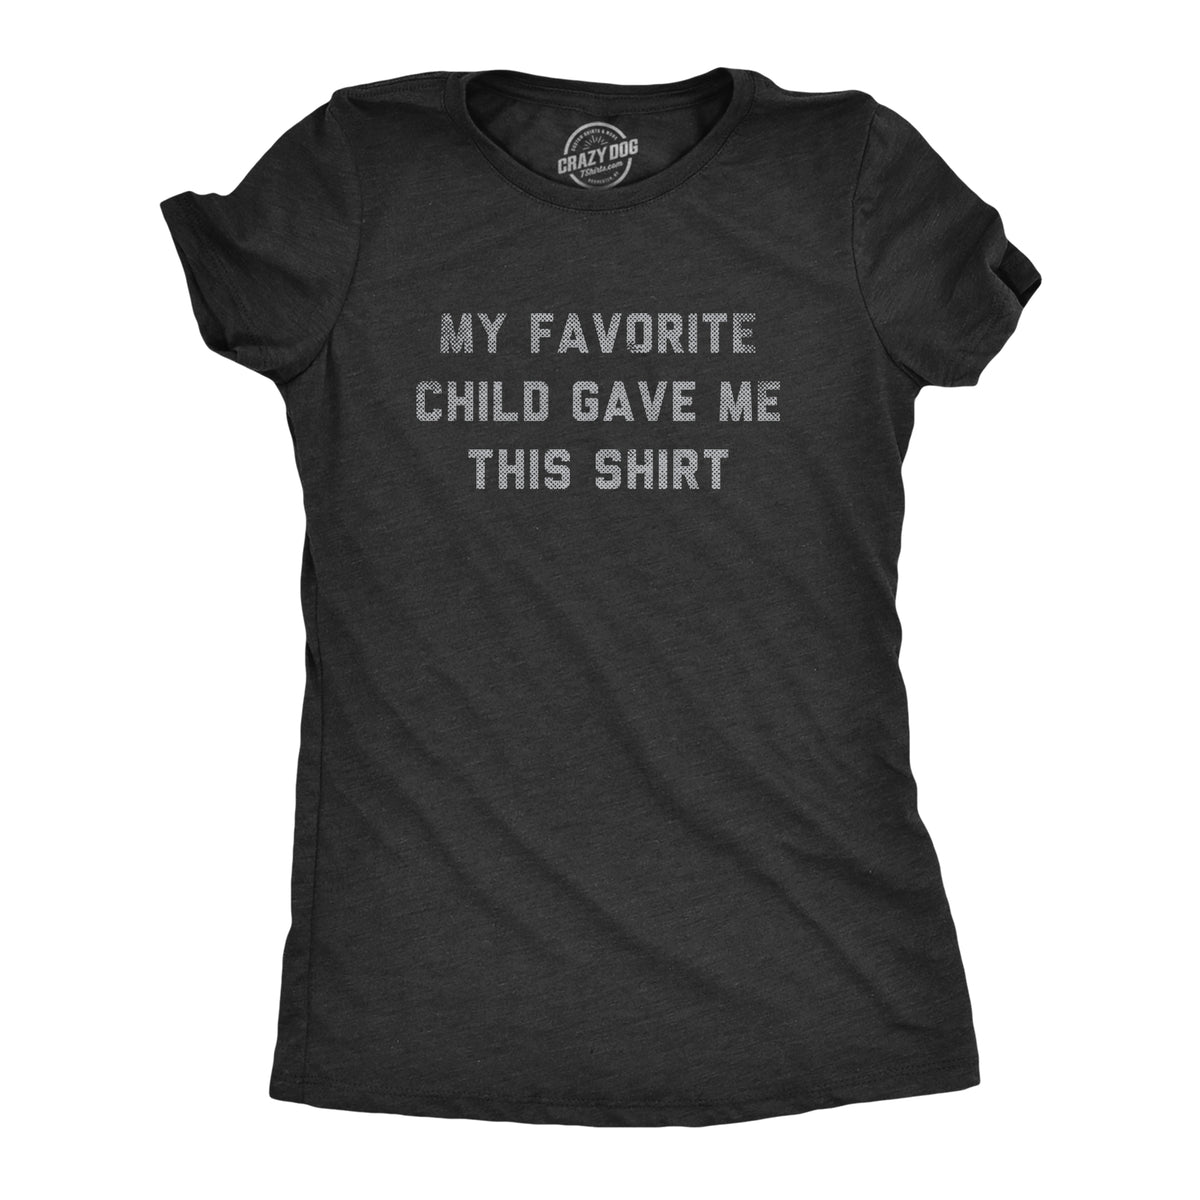 Funny Heather Black - FAVORITE My Favorite Child Gave Me This Shirt Womens T Shirt Nerdy Sarcastic Tee